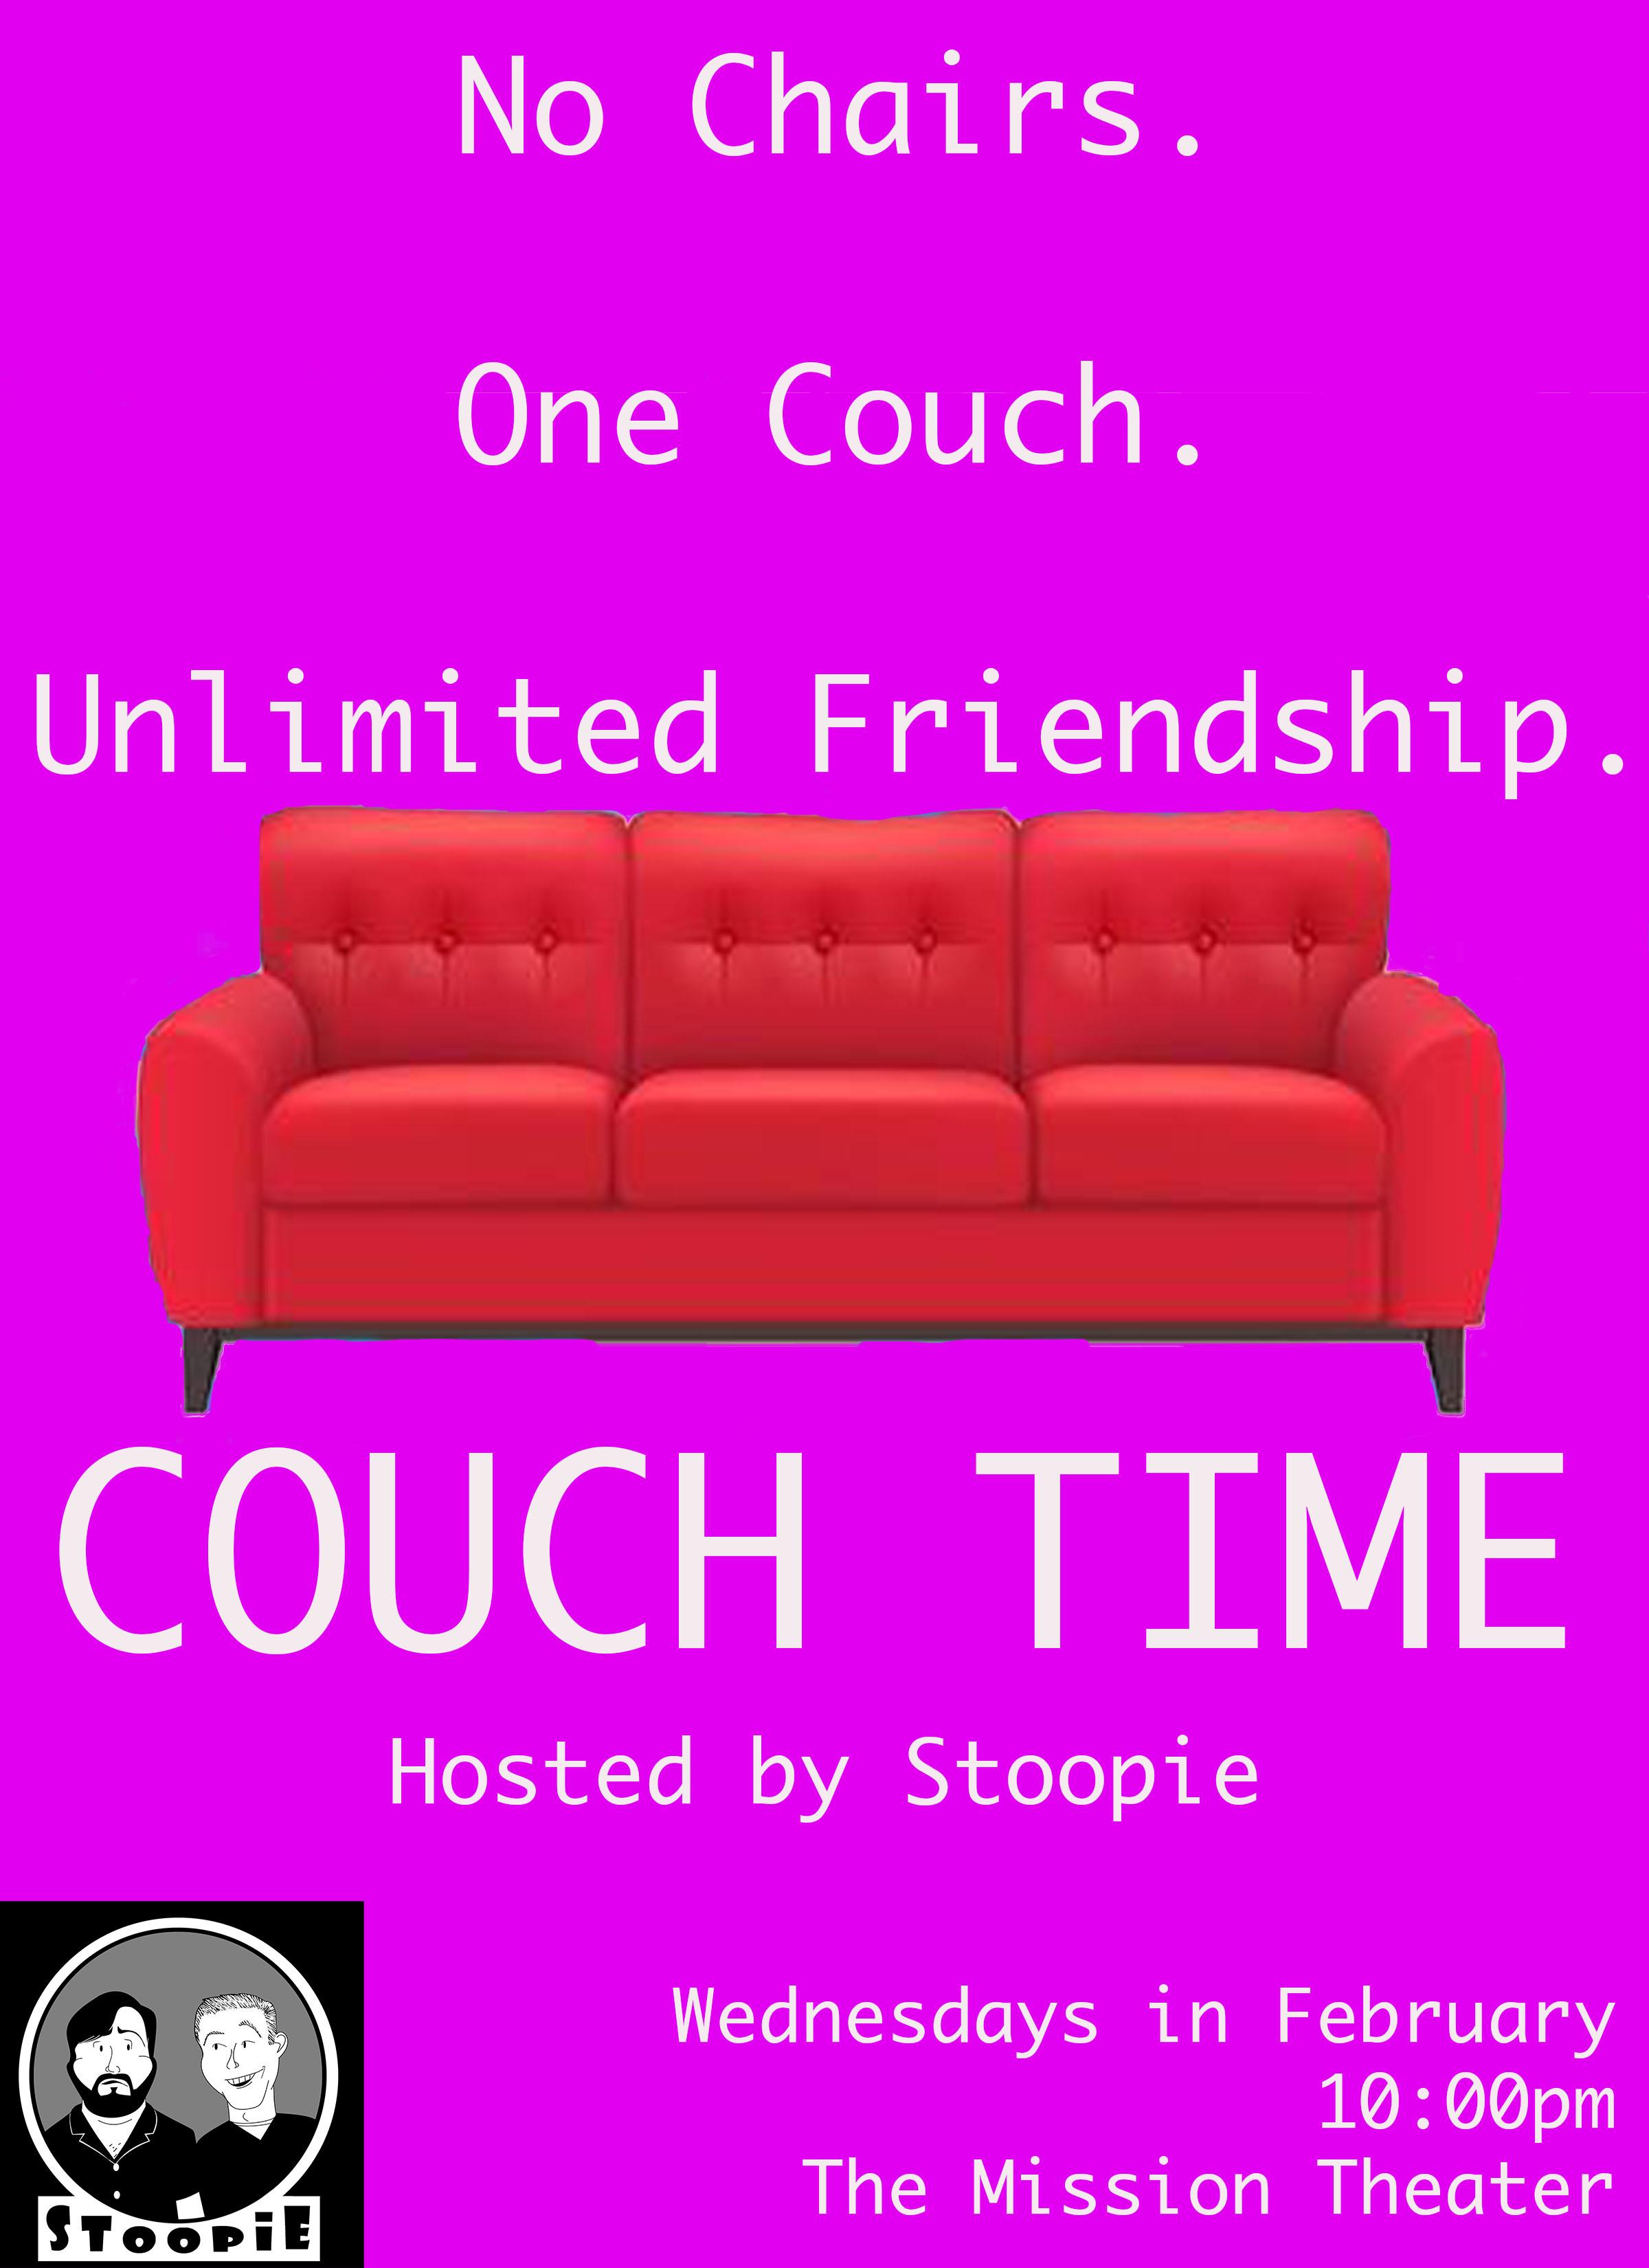 Couch Time Hosted by Stoopie